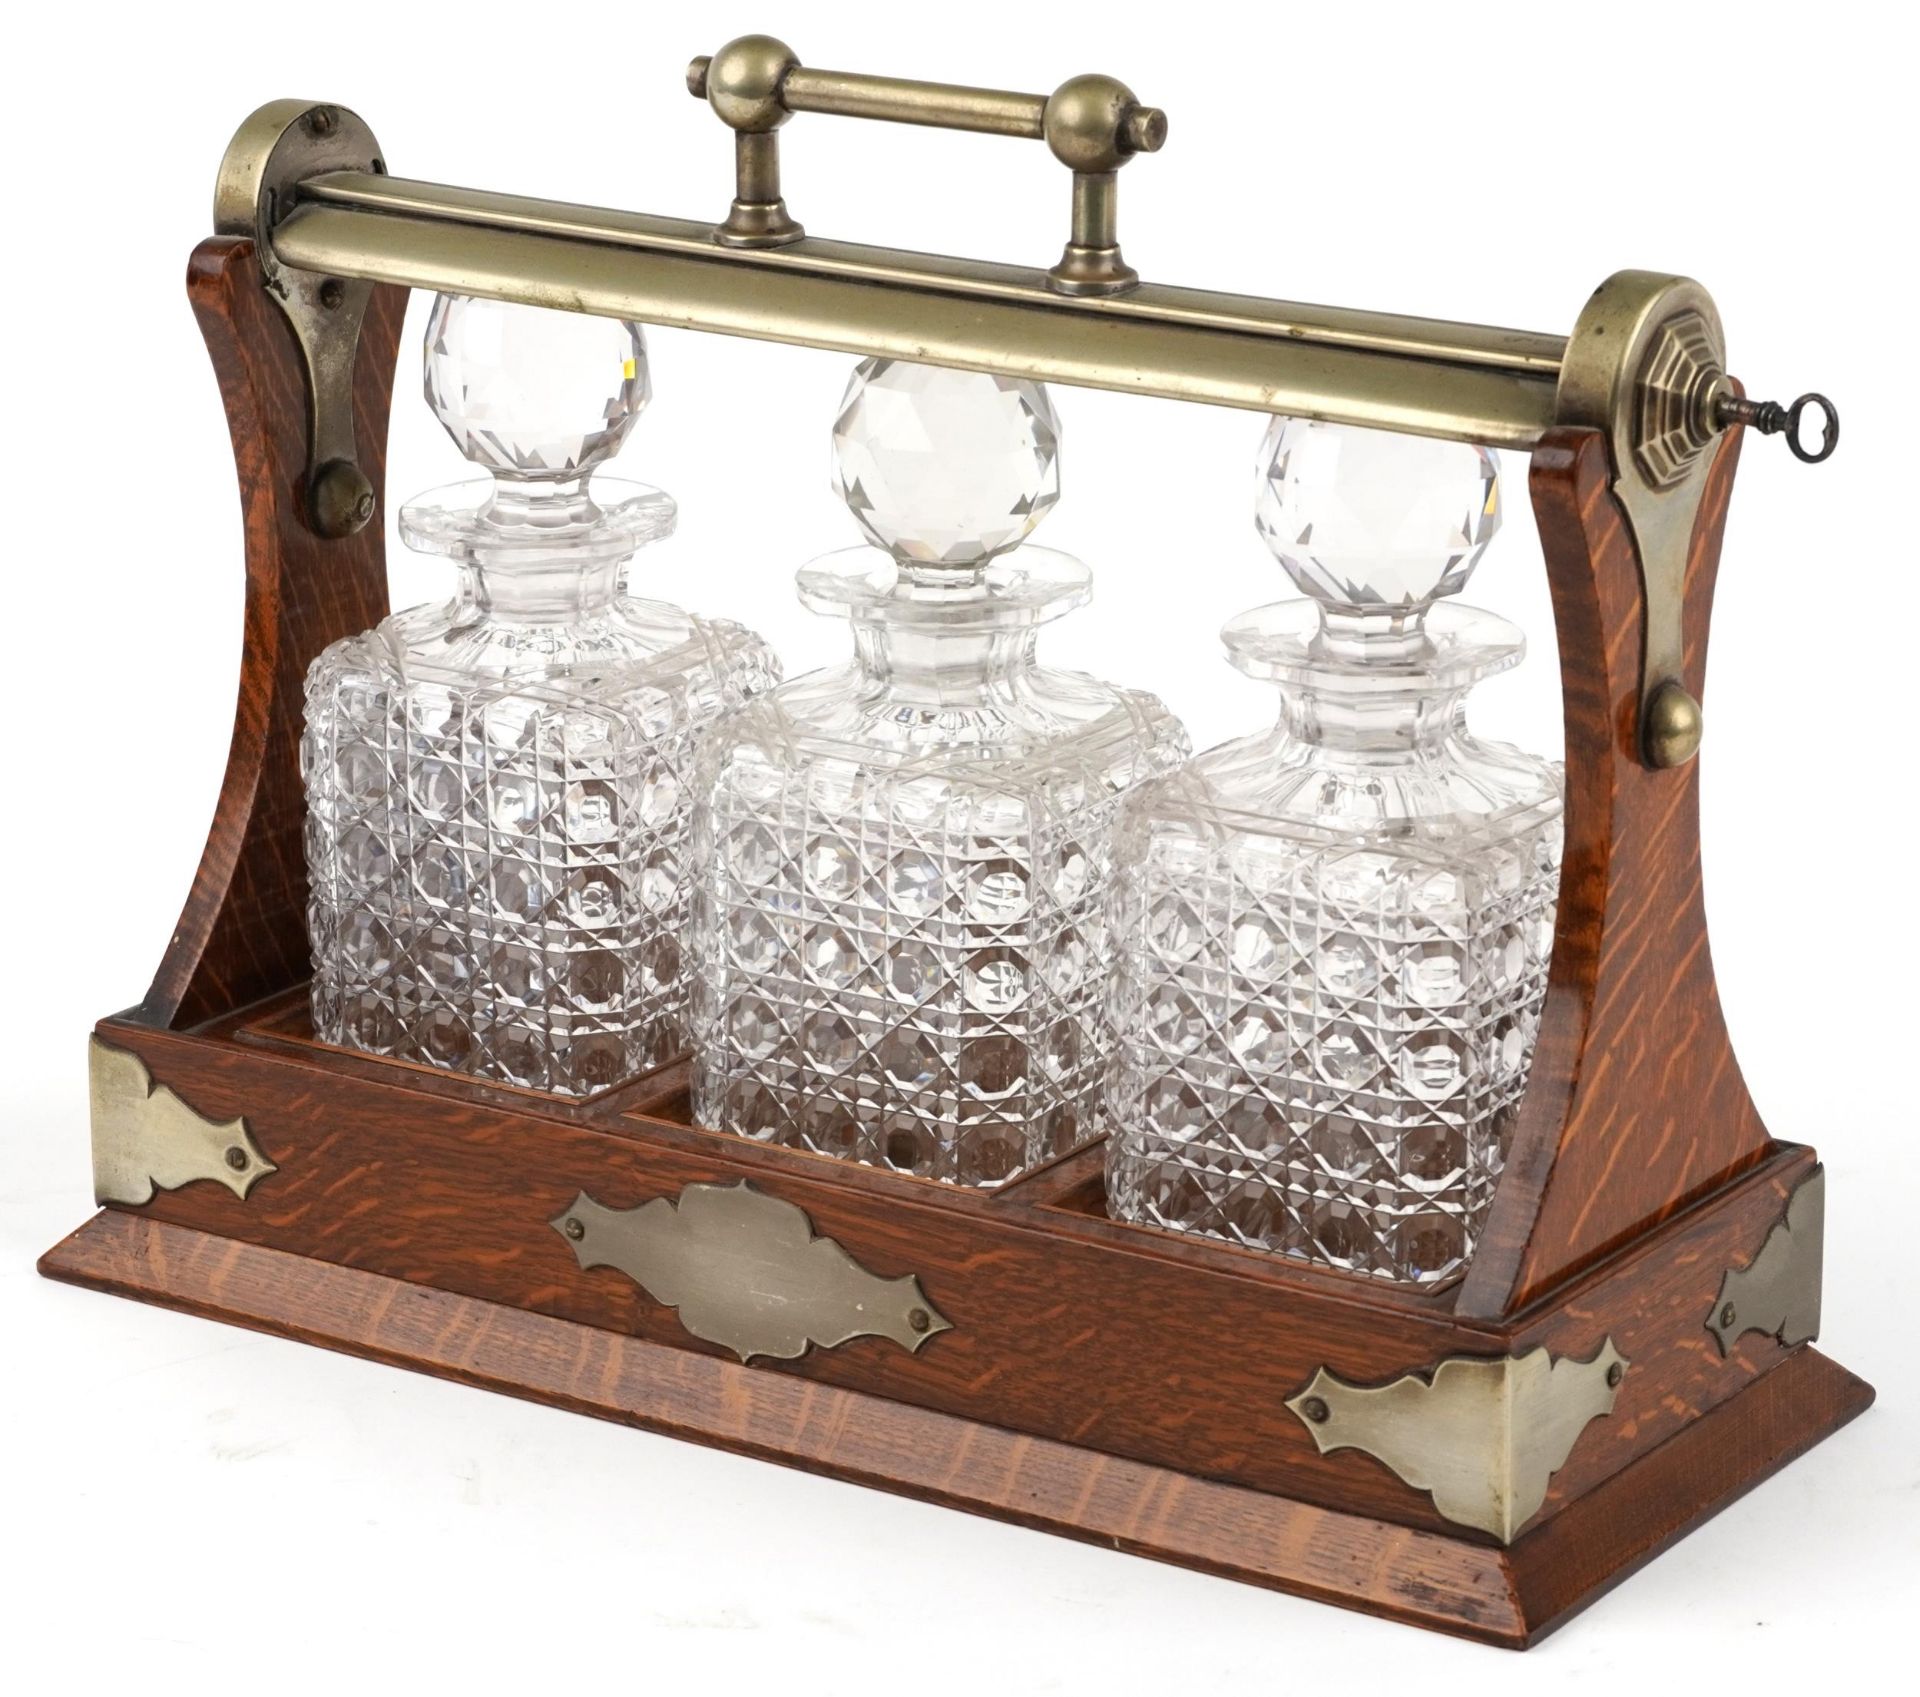 Edwardian oak Grimsell's Patent tantalus housing three cut glass decanters, 40cm wide : For